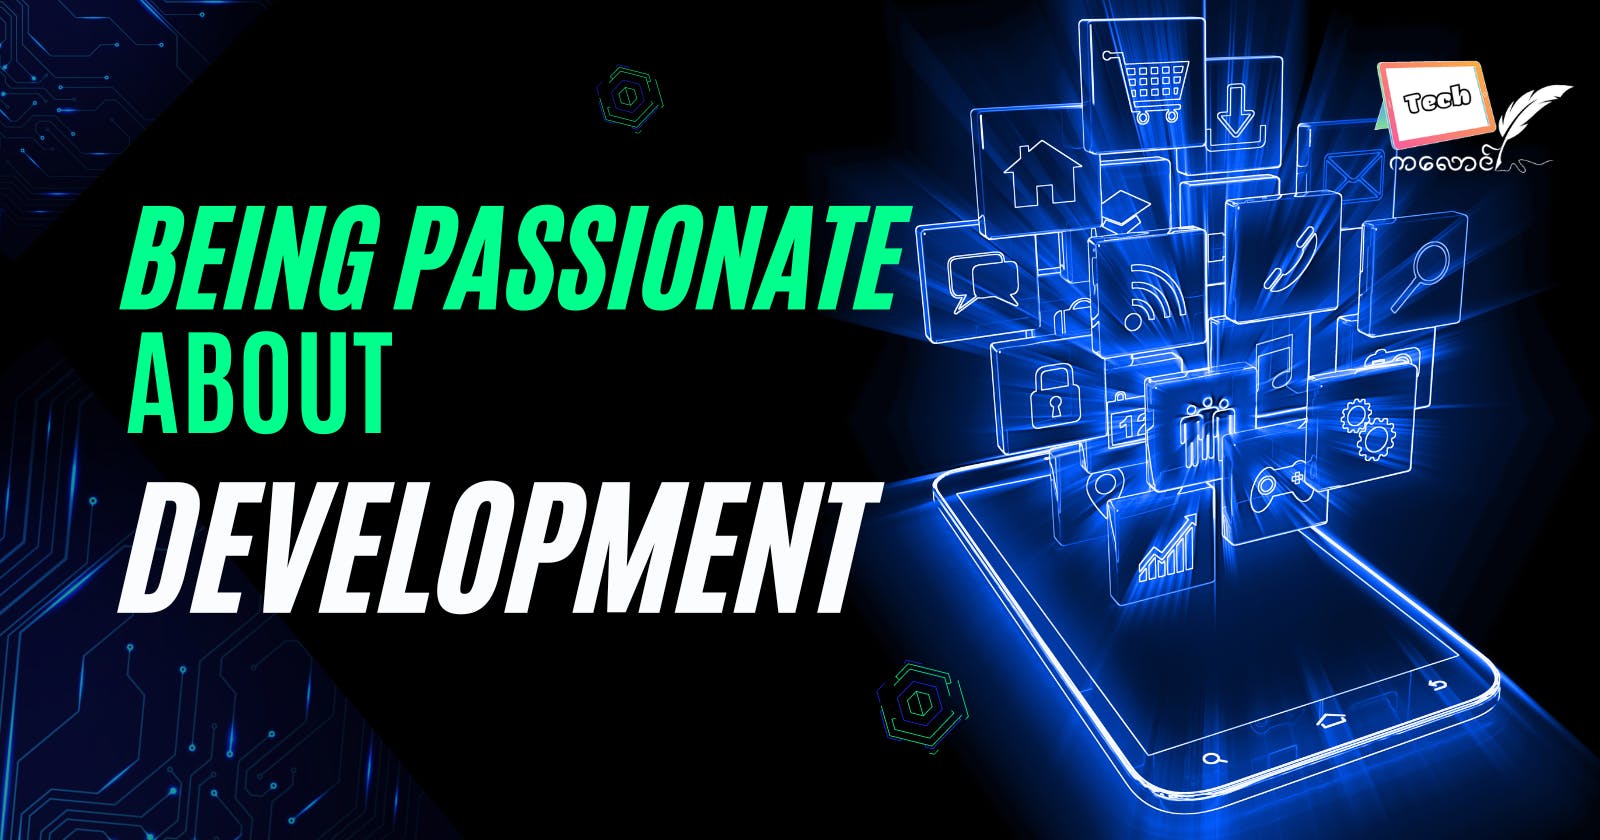 Being passionate about Development